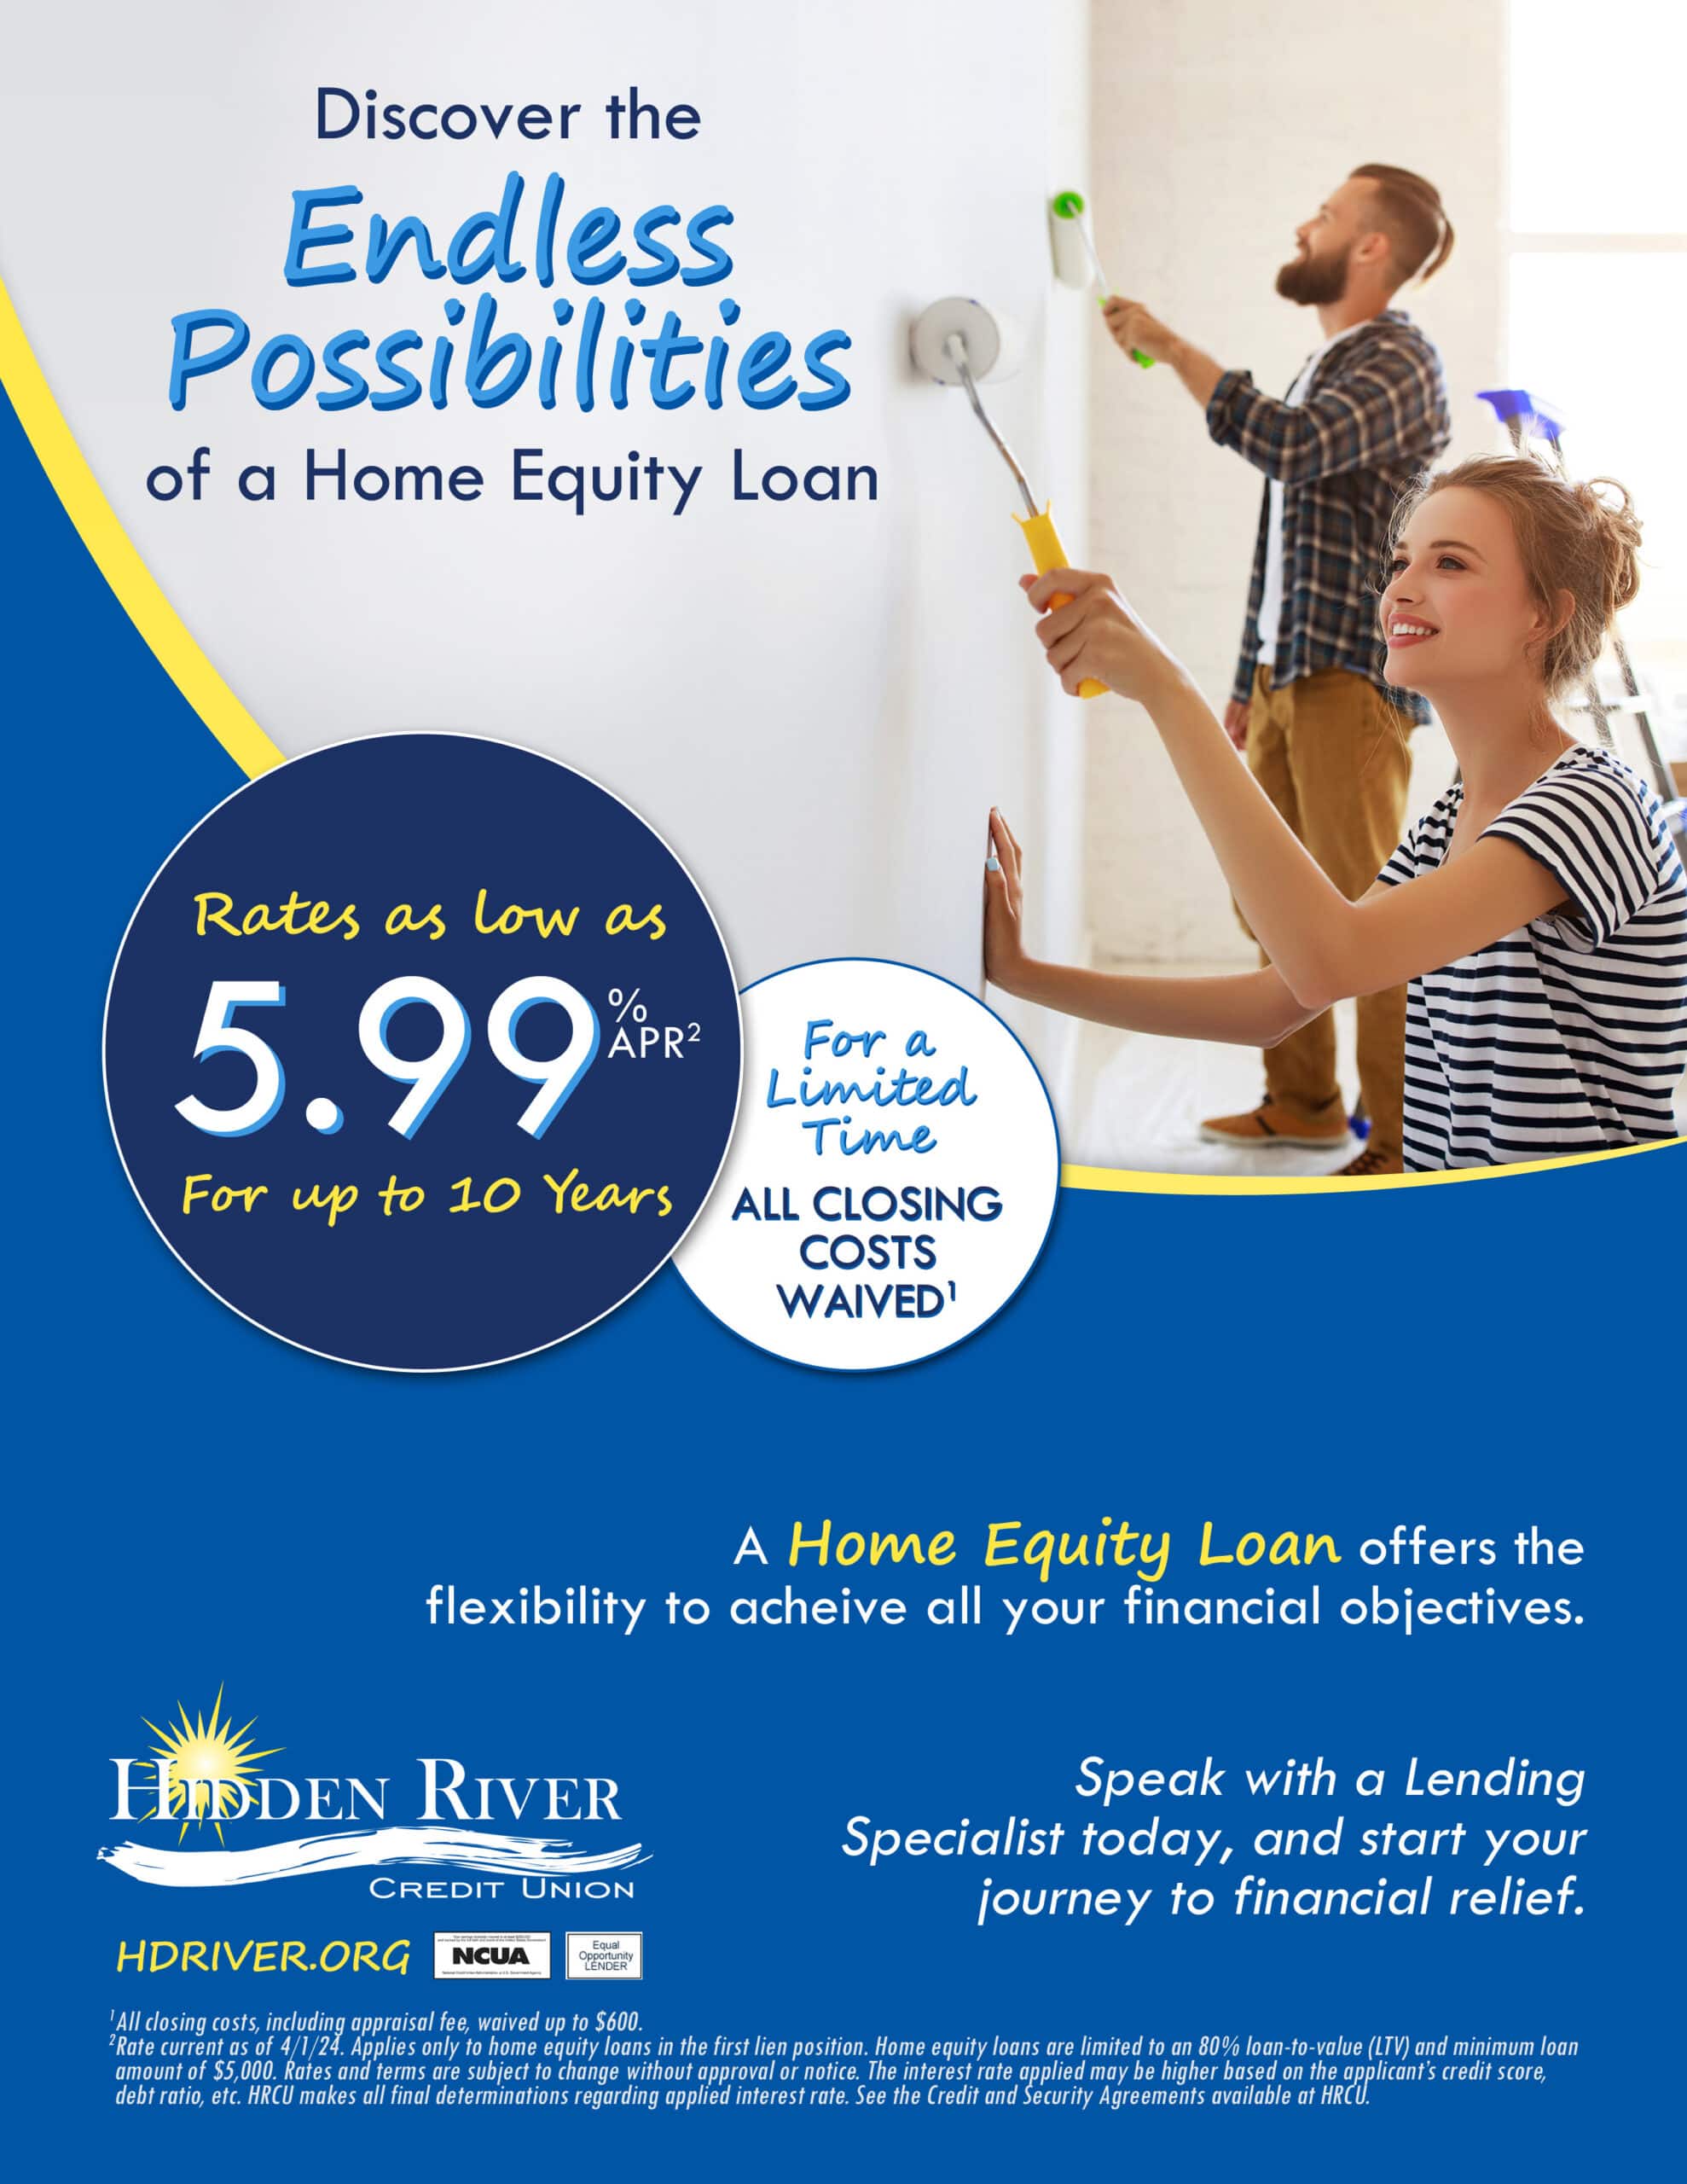 Discover the Endless Possibilities of a Home Equity Loan. Rates as low as 5.99% APR for up to 10 years. For a Limited Time - All Closing Costs Waived. Woman and man painting wall in sunny room. A Home Equity Loan offers the flexibility to achieve all your financial objectives. Speak with a Lending Specialist today, and start your journey to financial relief.